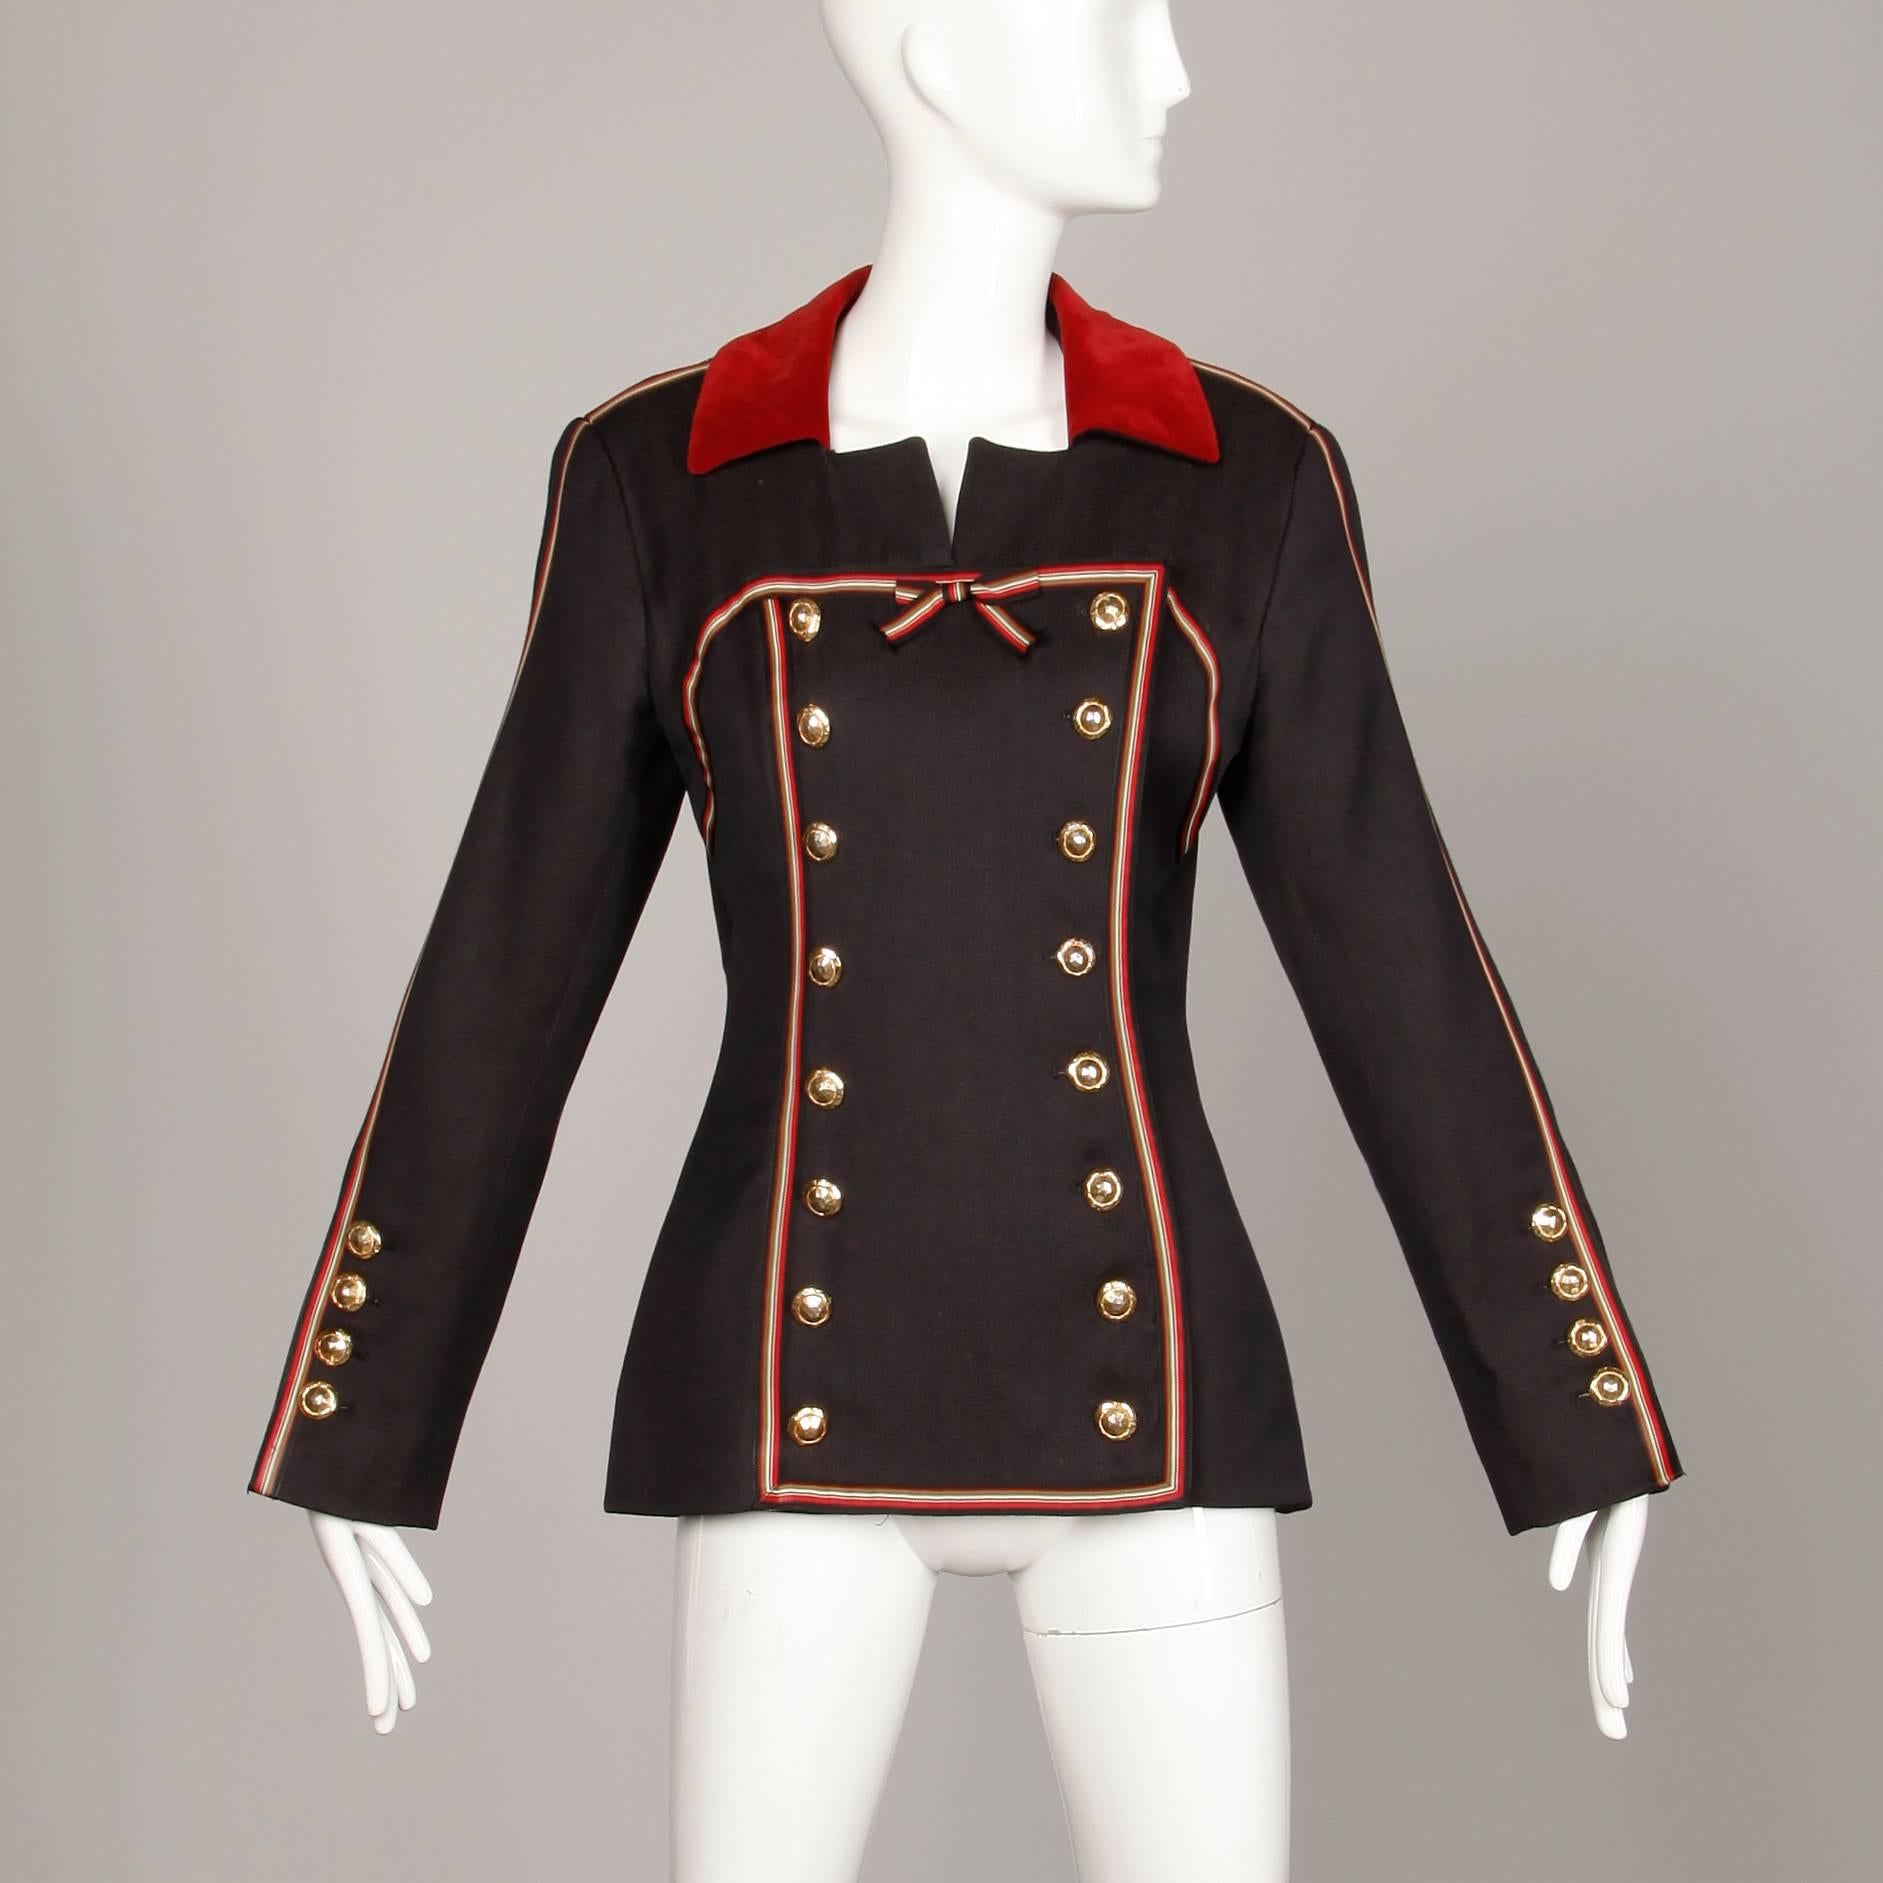 Incredible vintage Gemma Kahng! Military-inspired double breasted buttons, red velvet trim and striped ribbon detail. Fully lined with front button and snap closure. Faux rear pockets. Structured shoulder pads are sewn in underneath the lining. The